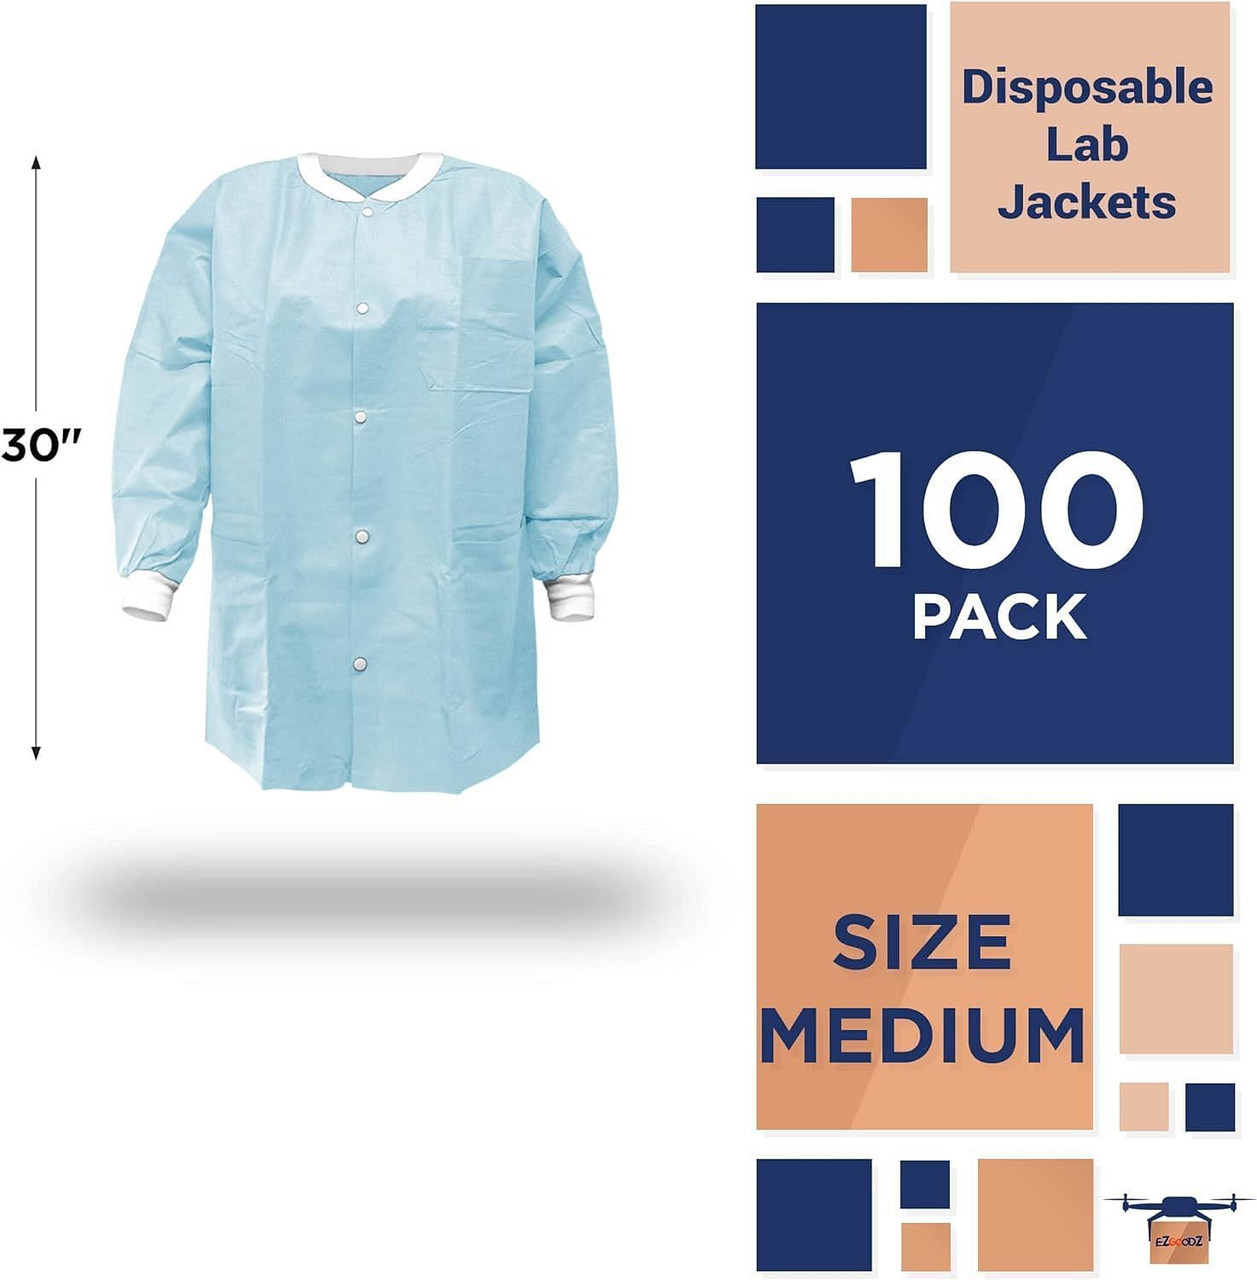 Disposable Lab Jackets; 30" Long. Pack of 100 Sky Blue Hip-Length Work Gowns Medium. SMS 50 gsm Shi